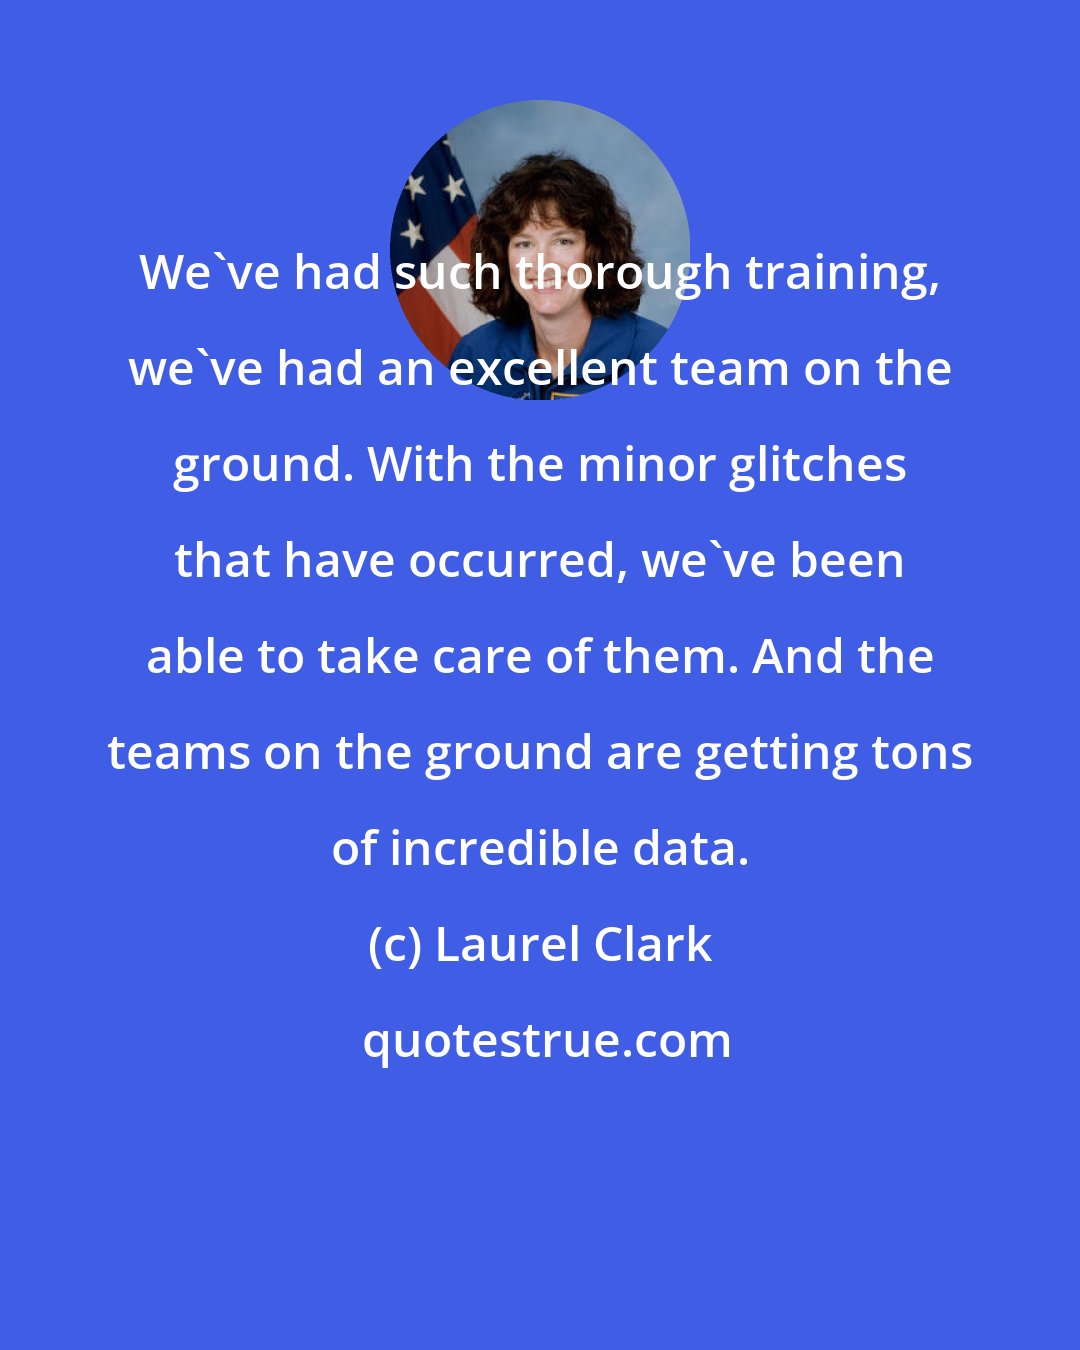 Laurel Clark: We've had such thorough training, we've had an excellent team on the ground. With the minor glitches that have occurred, we've been able to take care of them. And the teams on the ground are getting tons of incredible data.